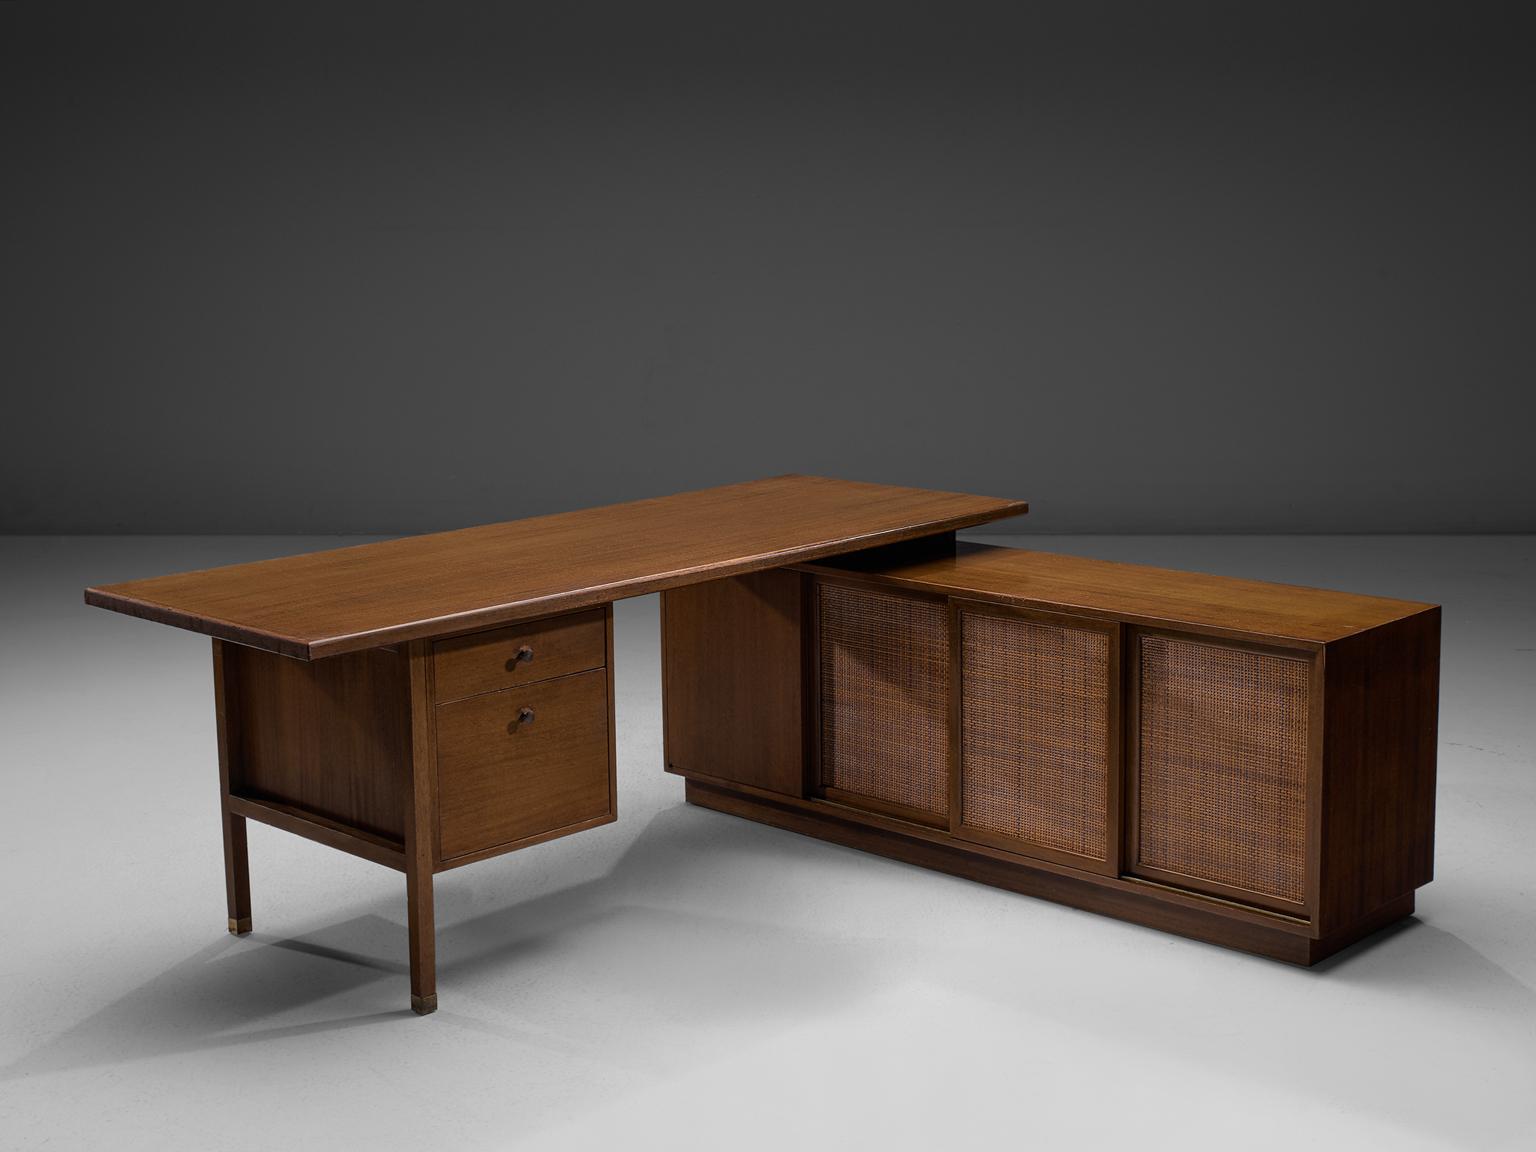 Harvey Probber, corner desk, mahogany, rattan and brass, United States, 1950s.

A beautiful Harvey Probber two-piece desk unit including several storage units. The desk surfaces two drawers, and is combined with, but not attached to, a storage